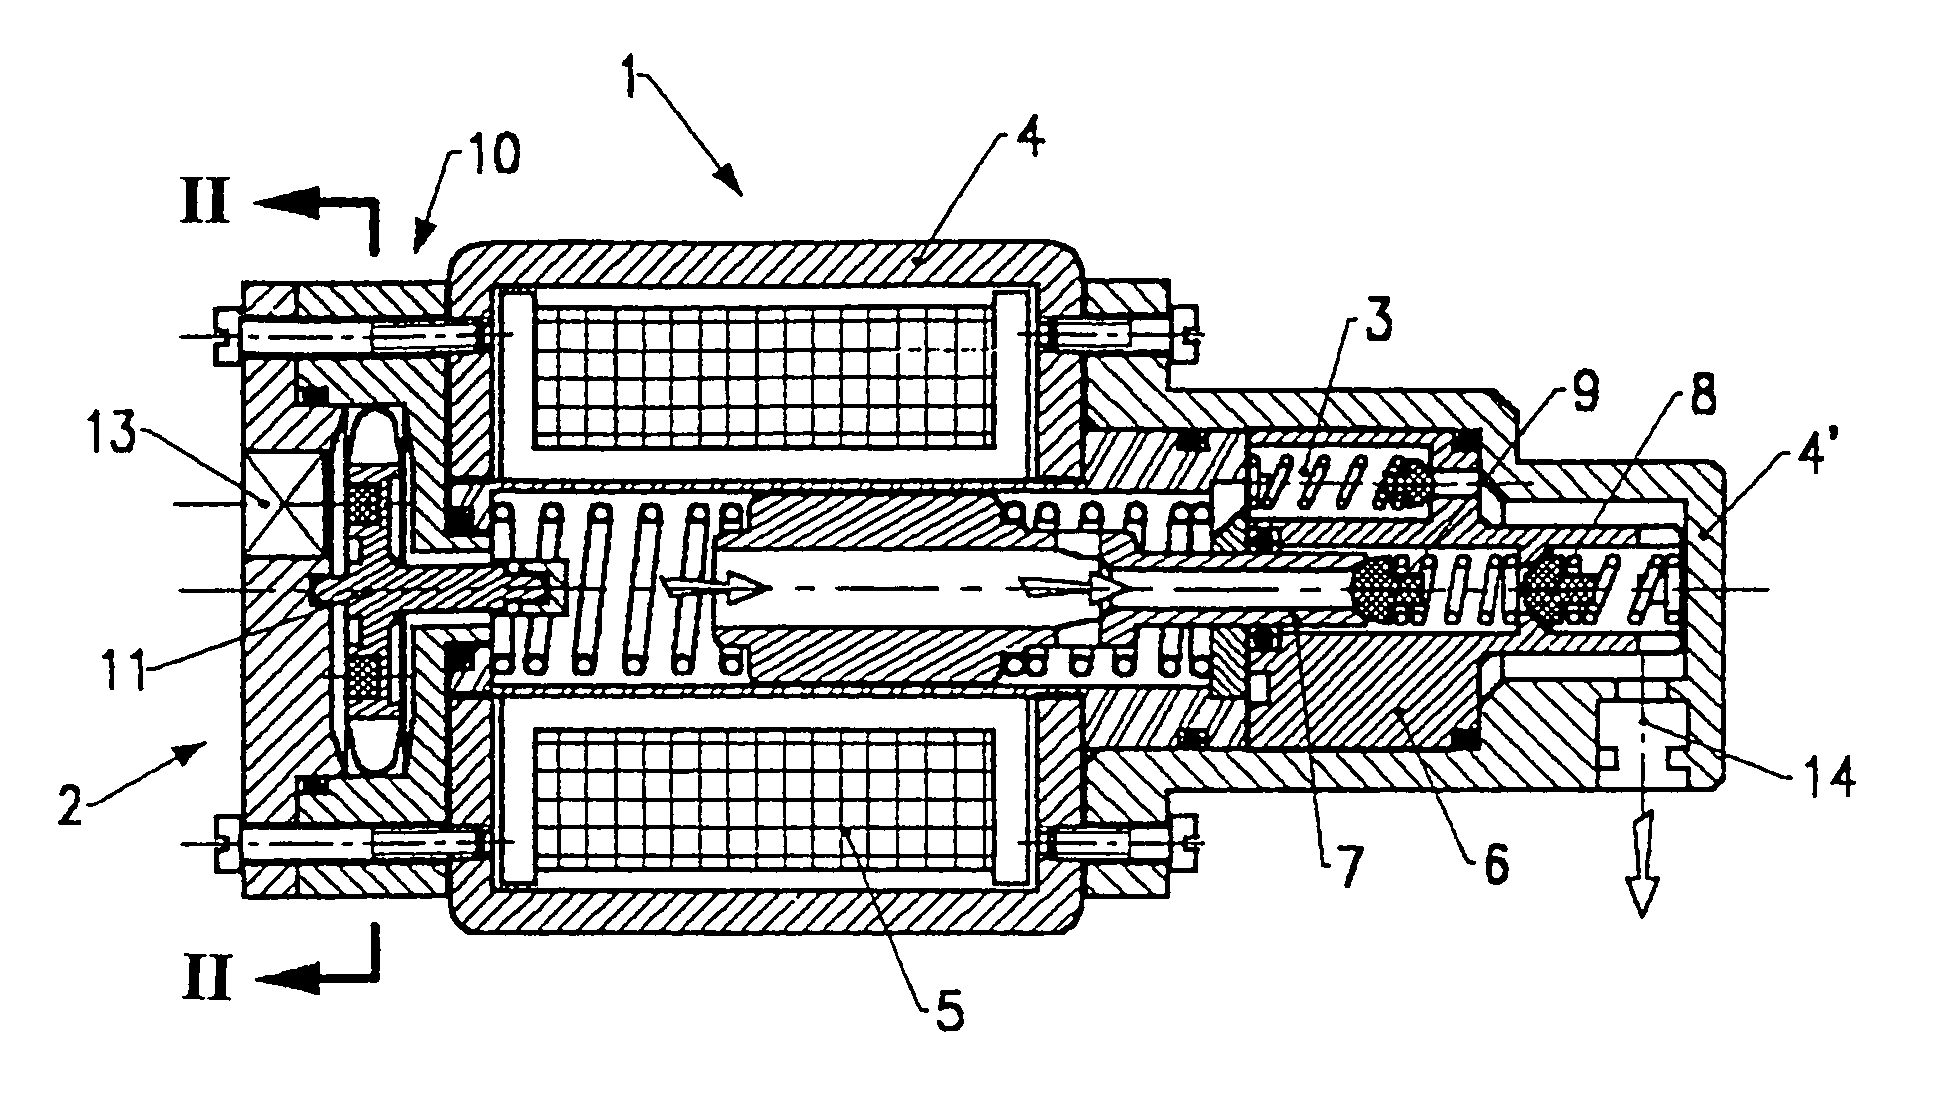 Motor pump system with axial through flow utilizing an incorporated flowmeter and pressure controller